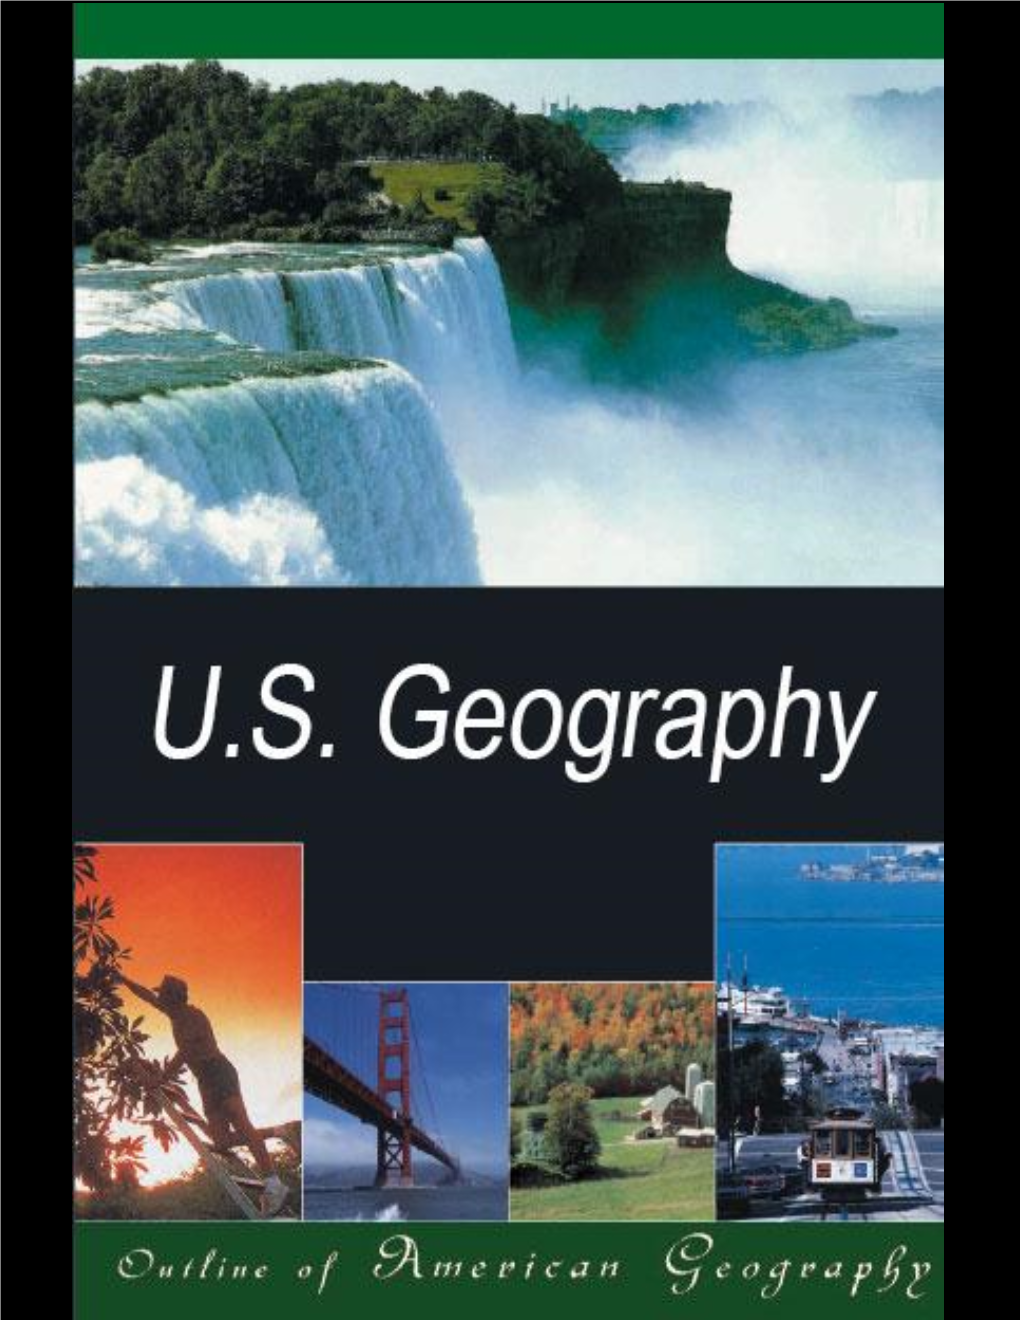 Outline of American Geograph